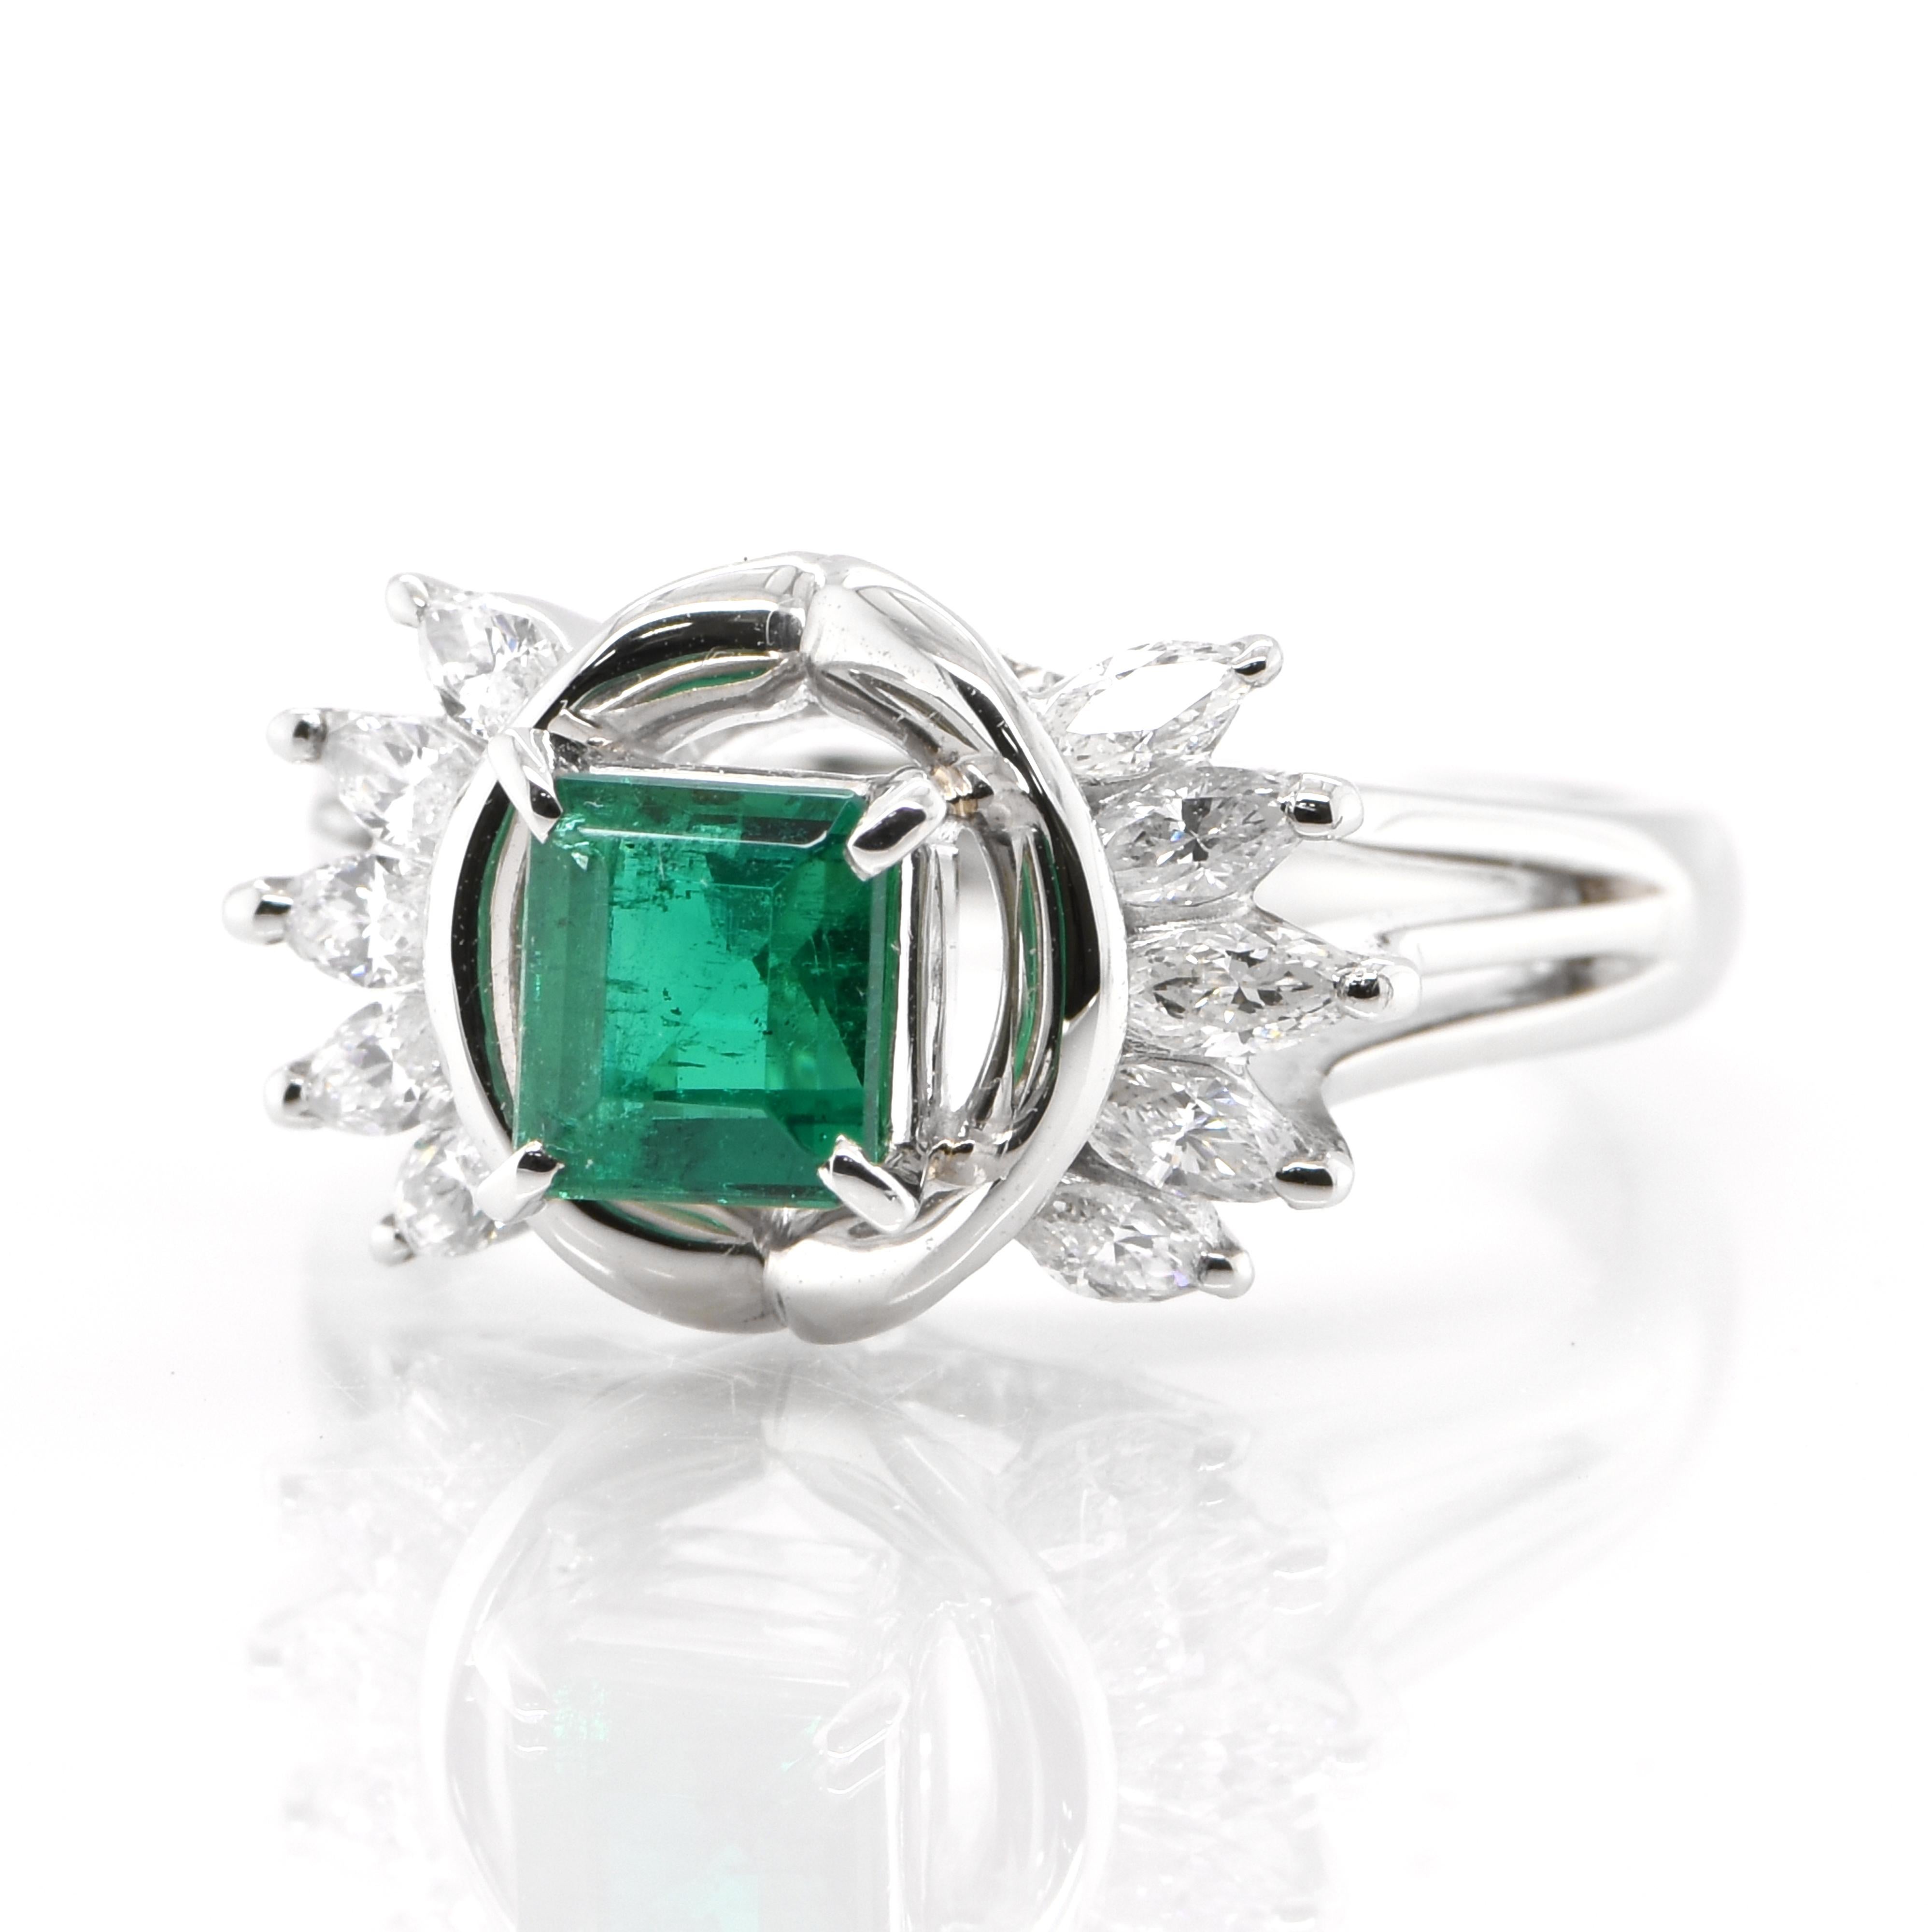 A stunning Cocktail Ring featuring a 0.73 Carat Natural Emerald and 0.43 Carats of Diamond Accents set in Platinum. People have admired emerald’s green for thousands of years. Emeralds have always been associated with the lushest landscapes and the